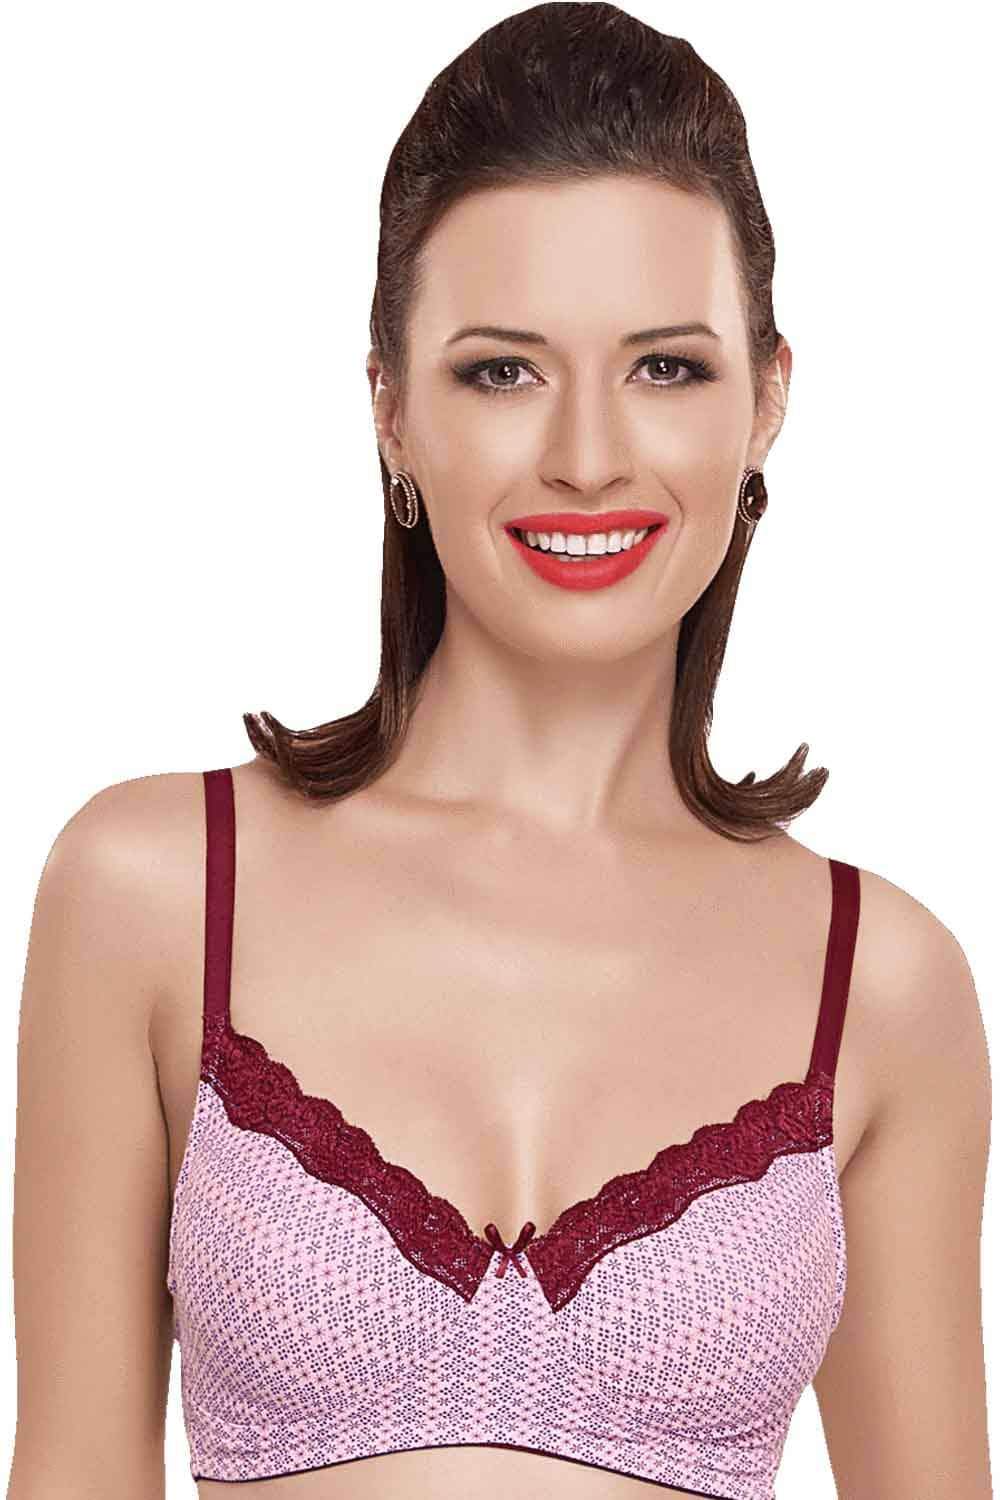 Inner Sense Organic Cotton Antimicrobial Lightly Padded Lace Touch Bra Bras, Cotton, featured, full coverage, organic, T-shirt Bra - bare essentials